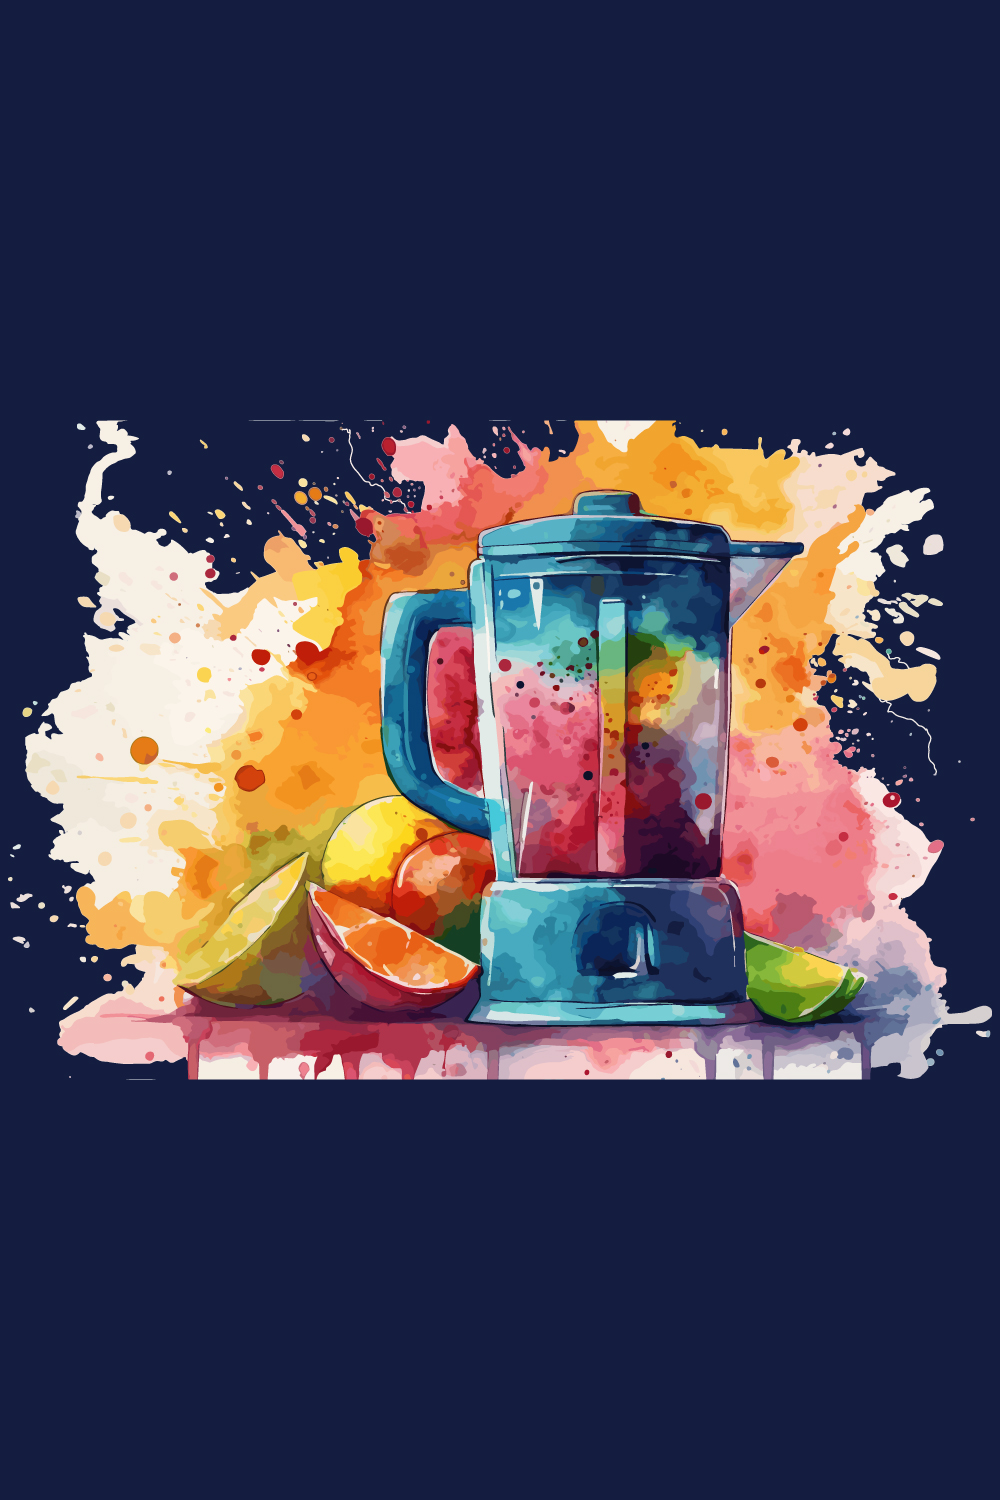 Electrical Juicer Blander machine with splash watercolor pinterest preview image.